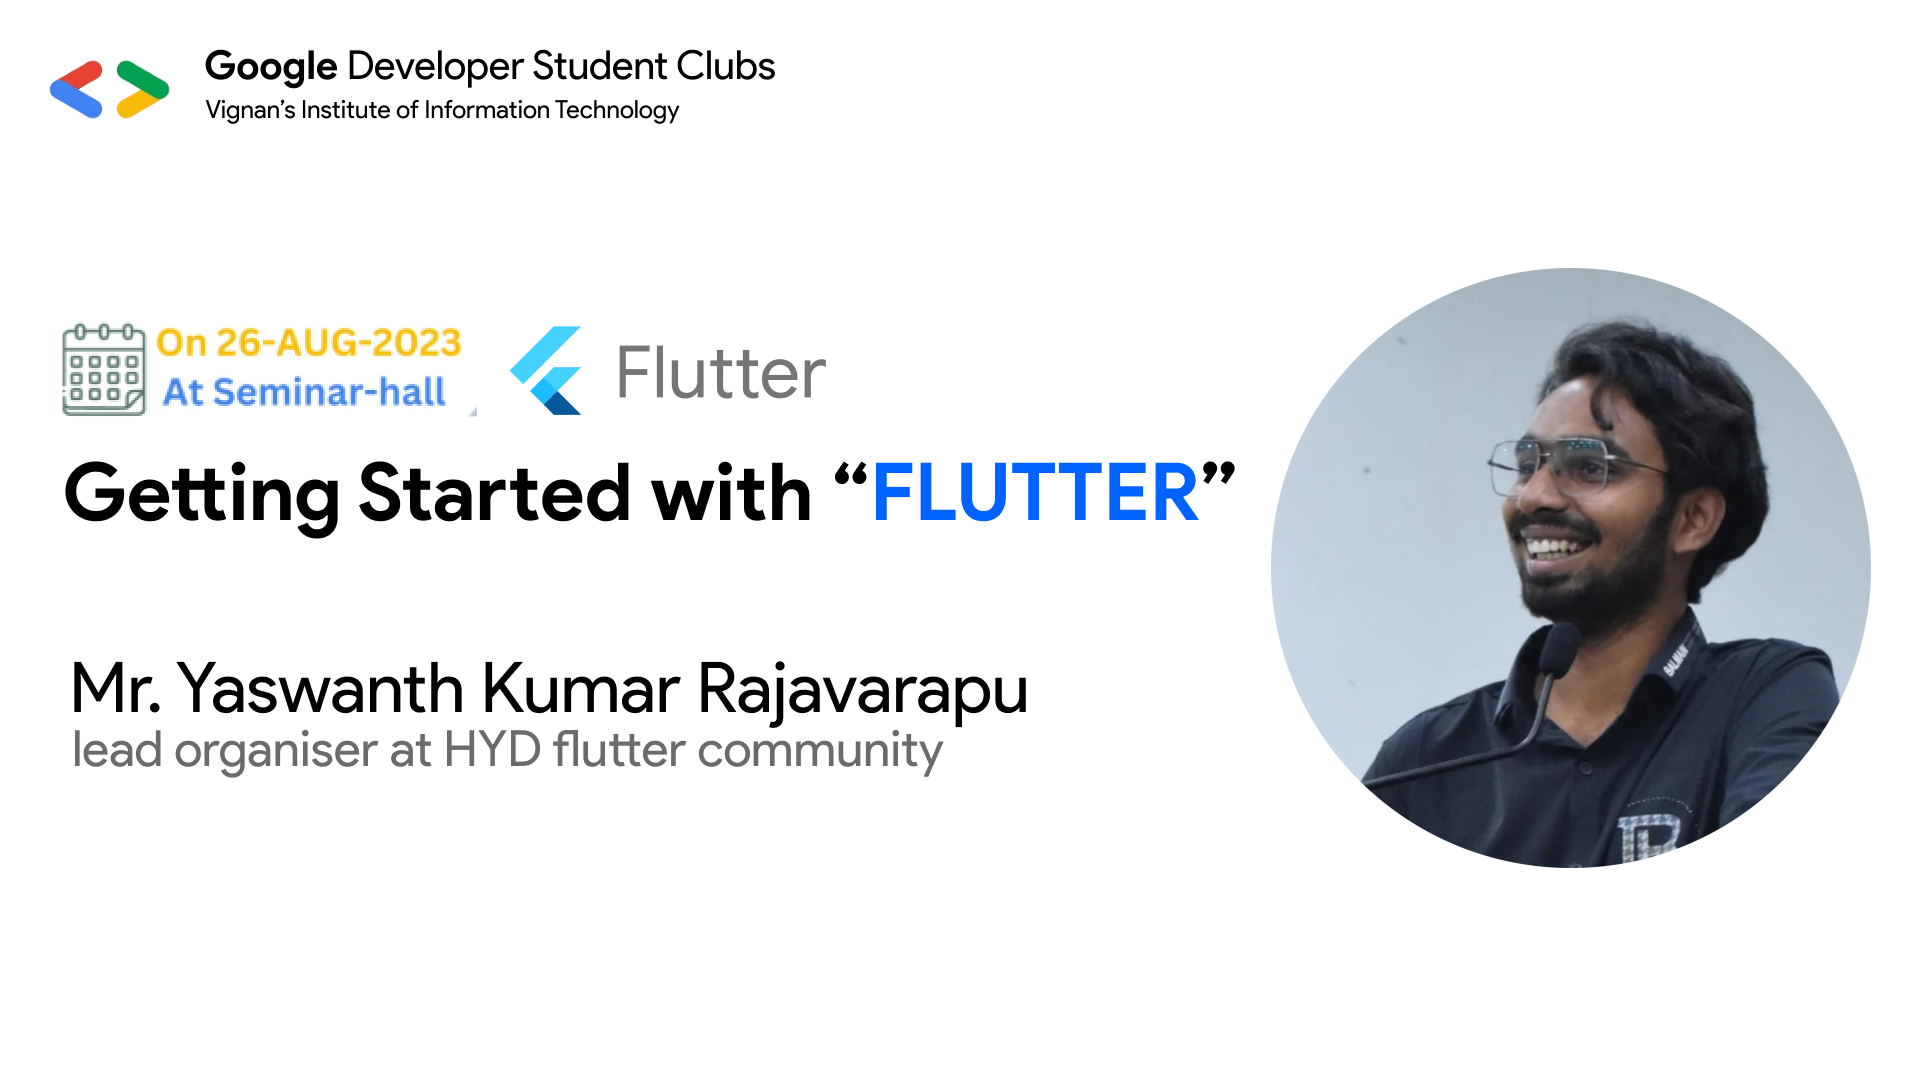 Inauguration followed by a session on Flutter